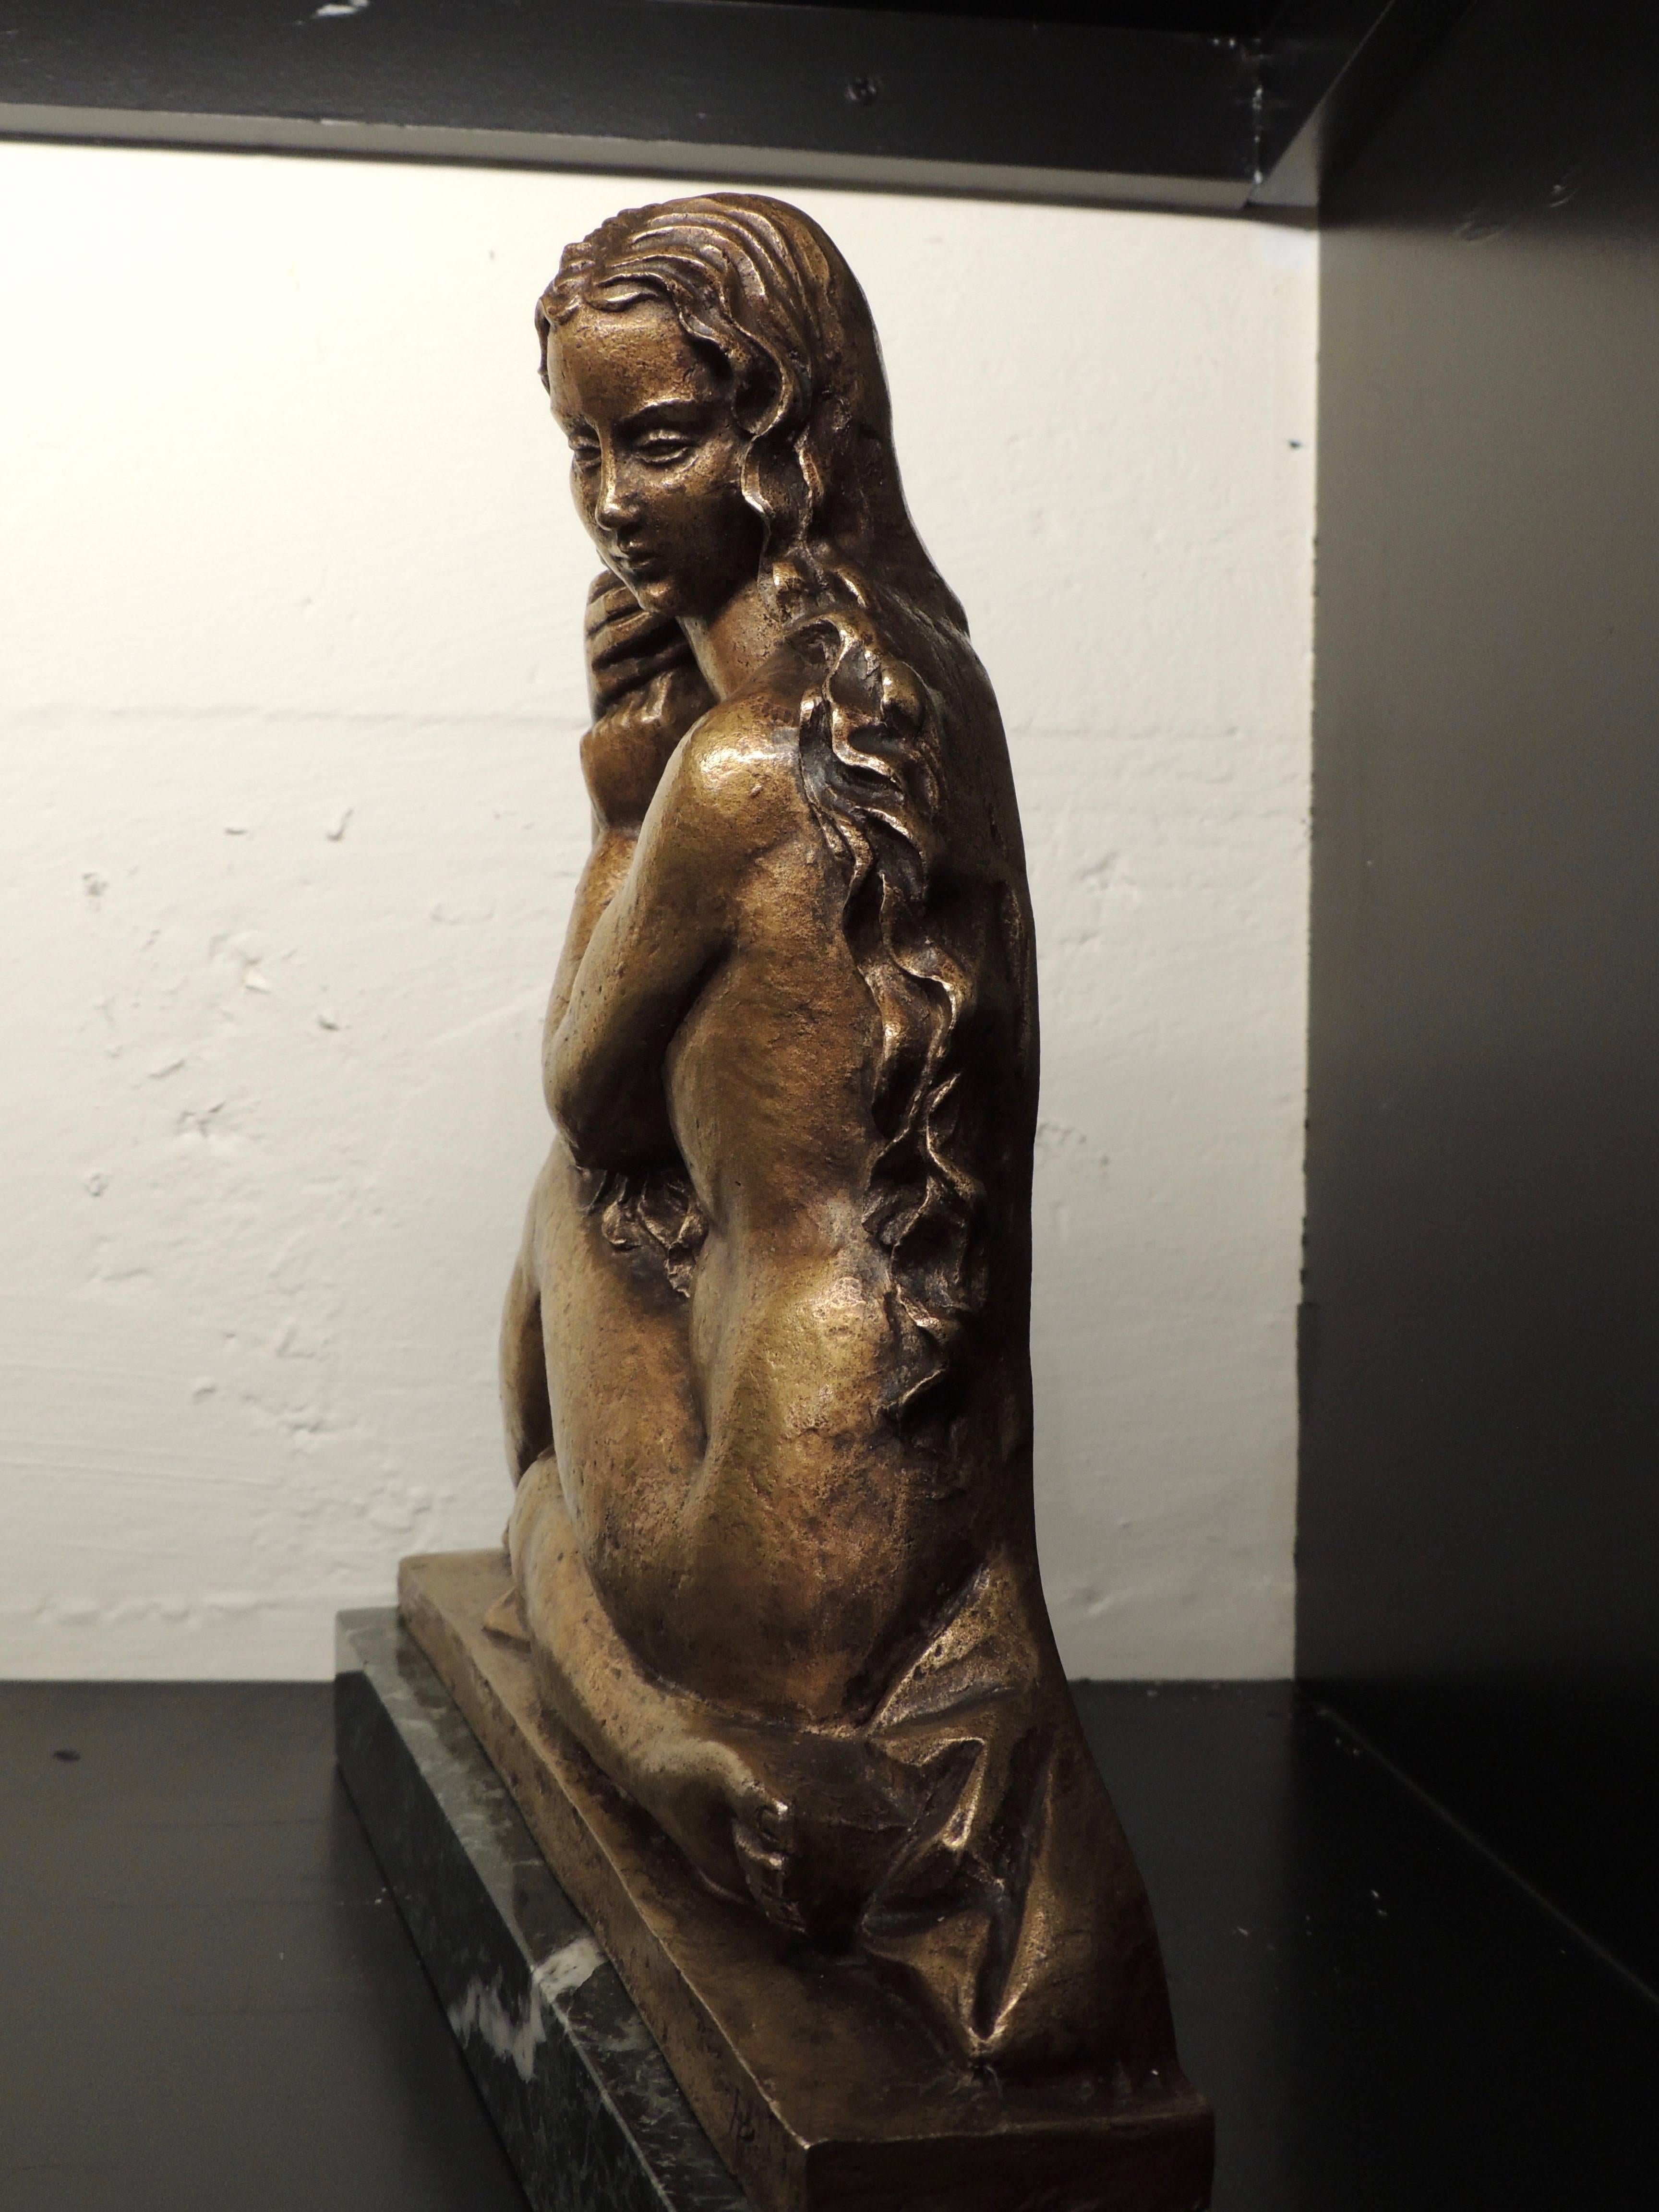 Mid-20th Century Art Deco Golden Girl in Bronze Sculpture with Stylized Curls Statue